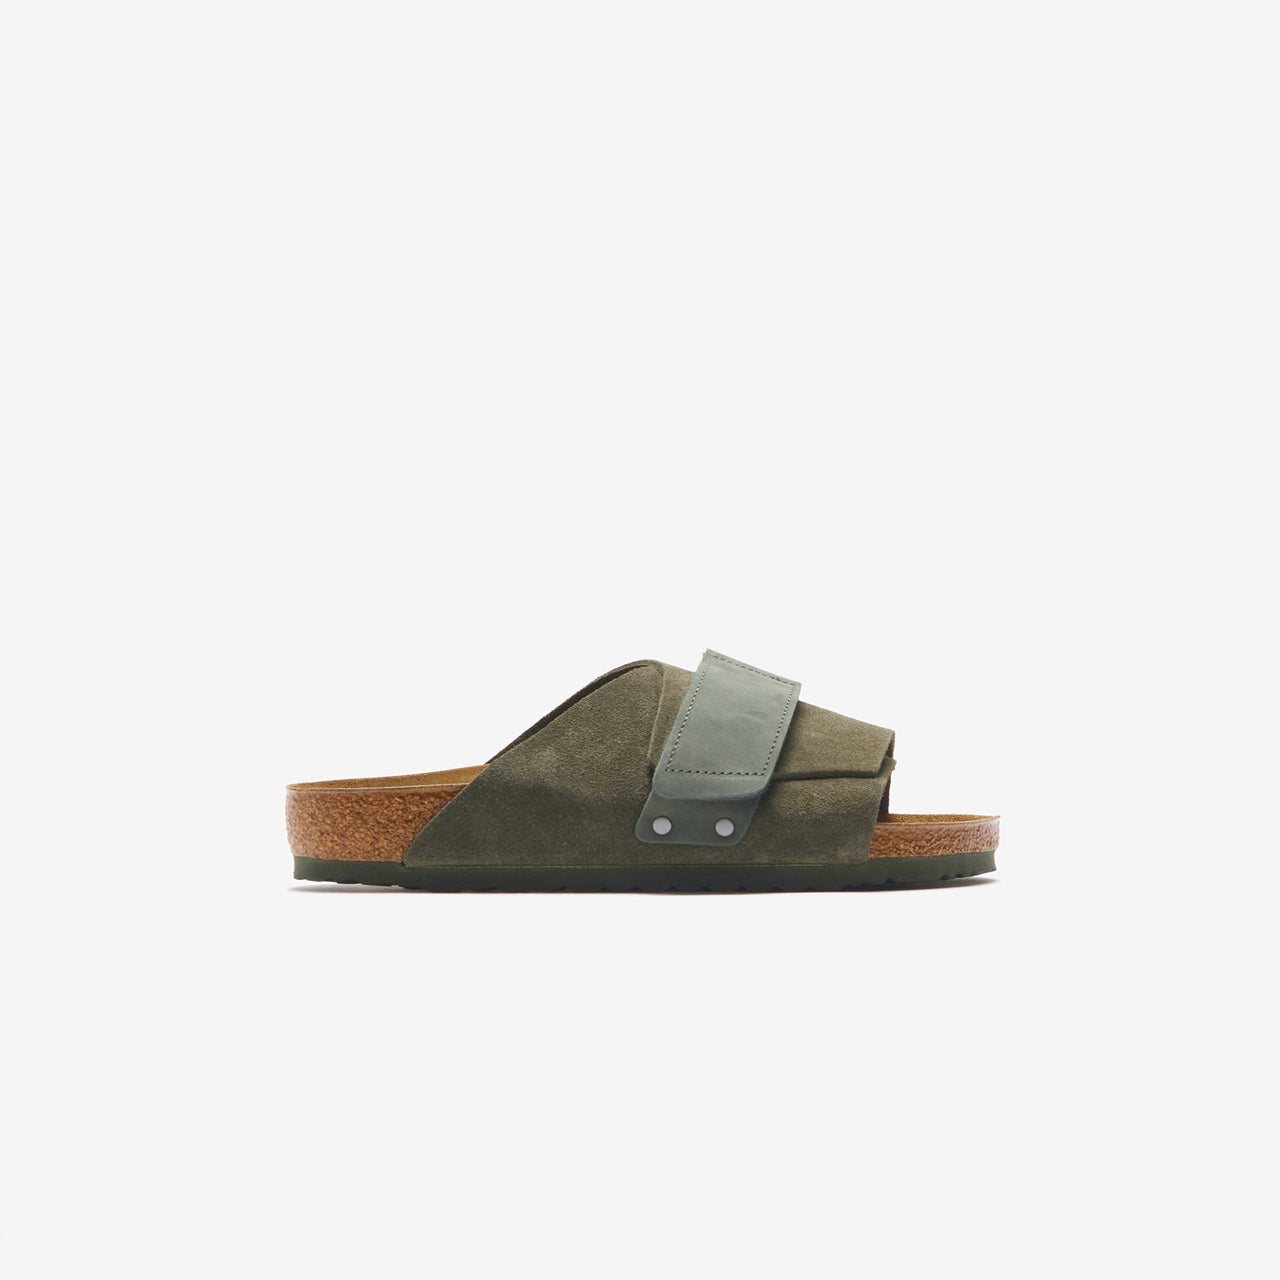 Birkenstock Kyoto Suede Thyme sandals with adjustable straps and cushioned footbed